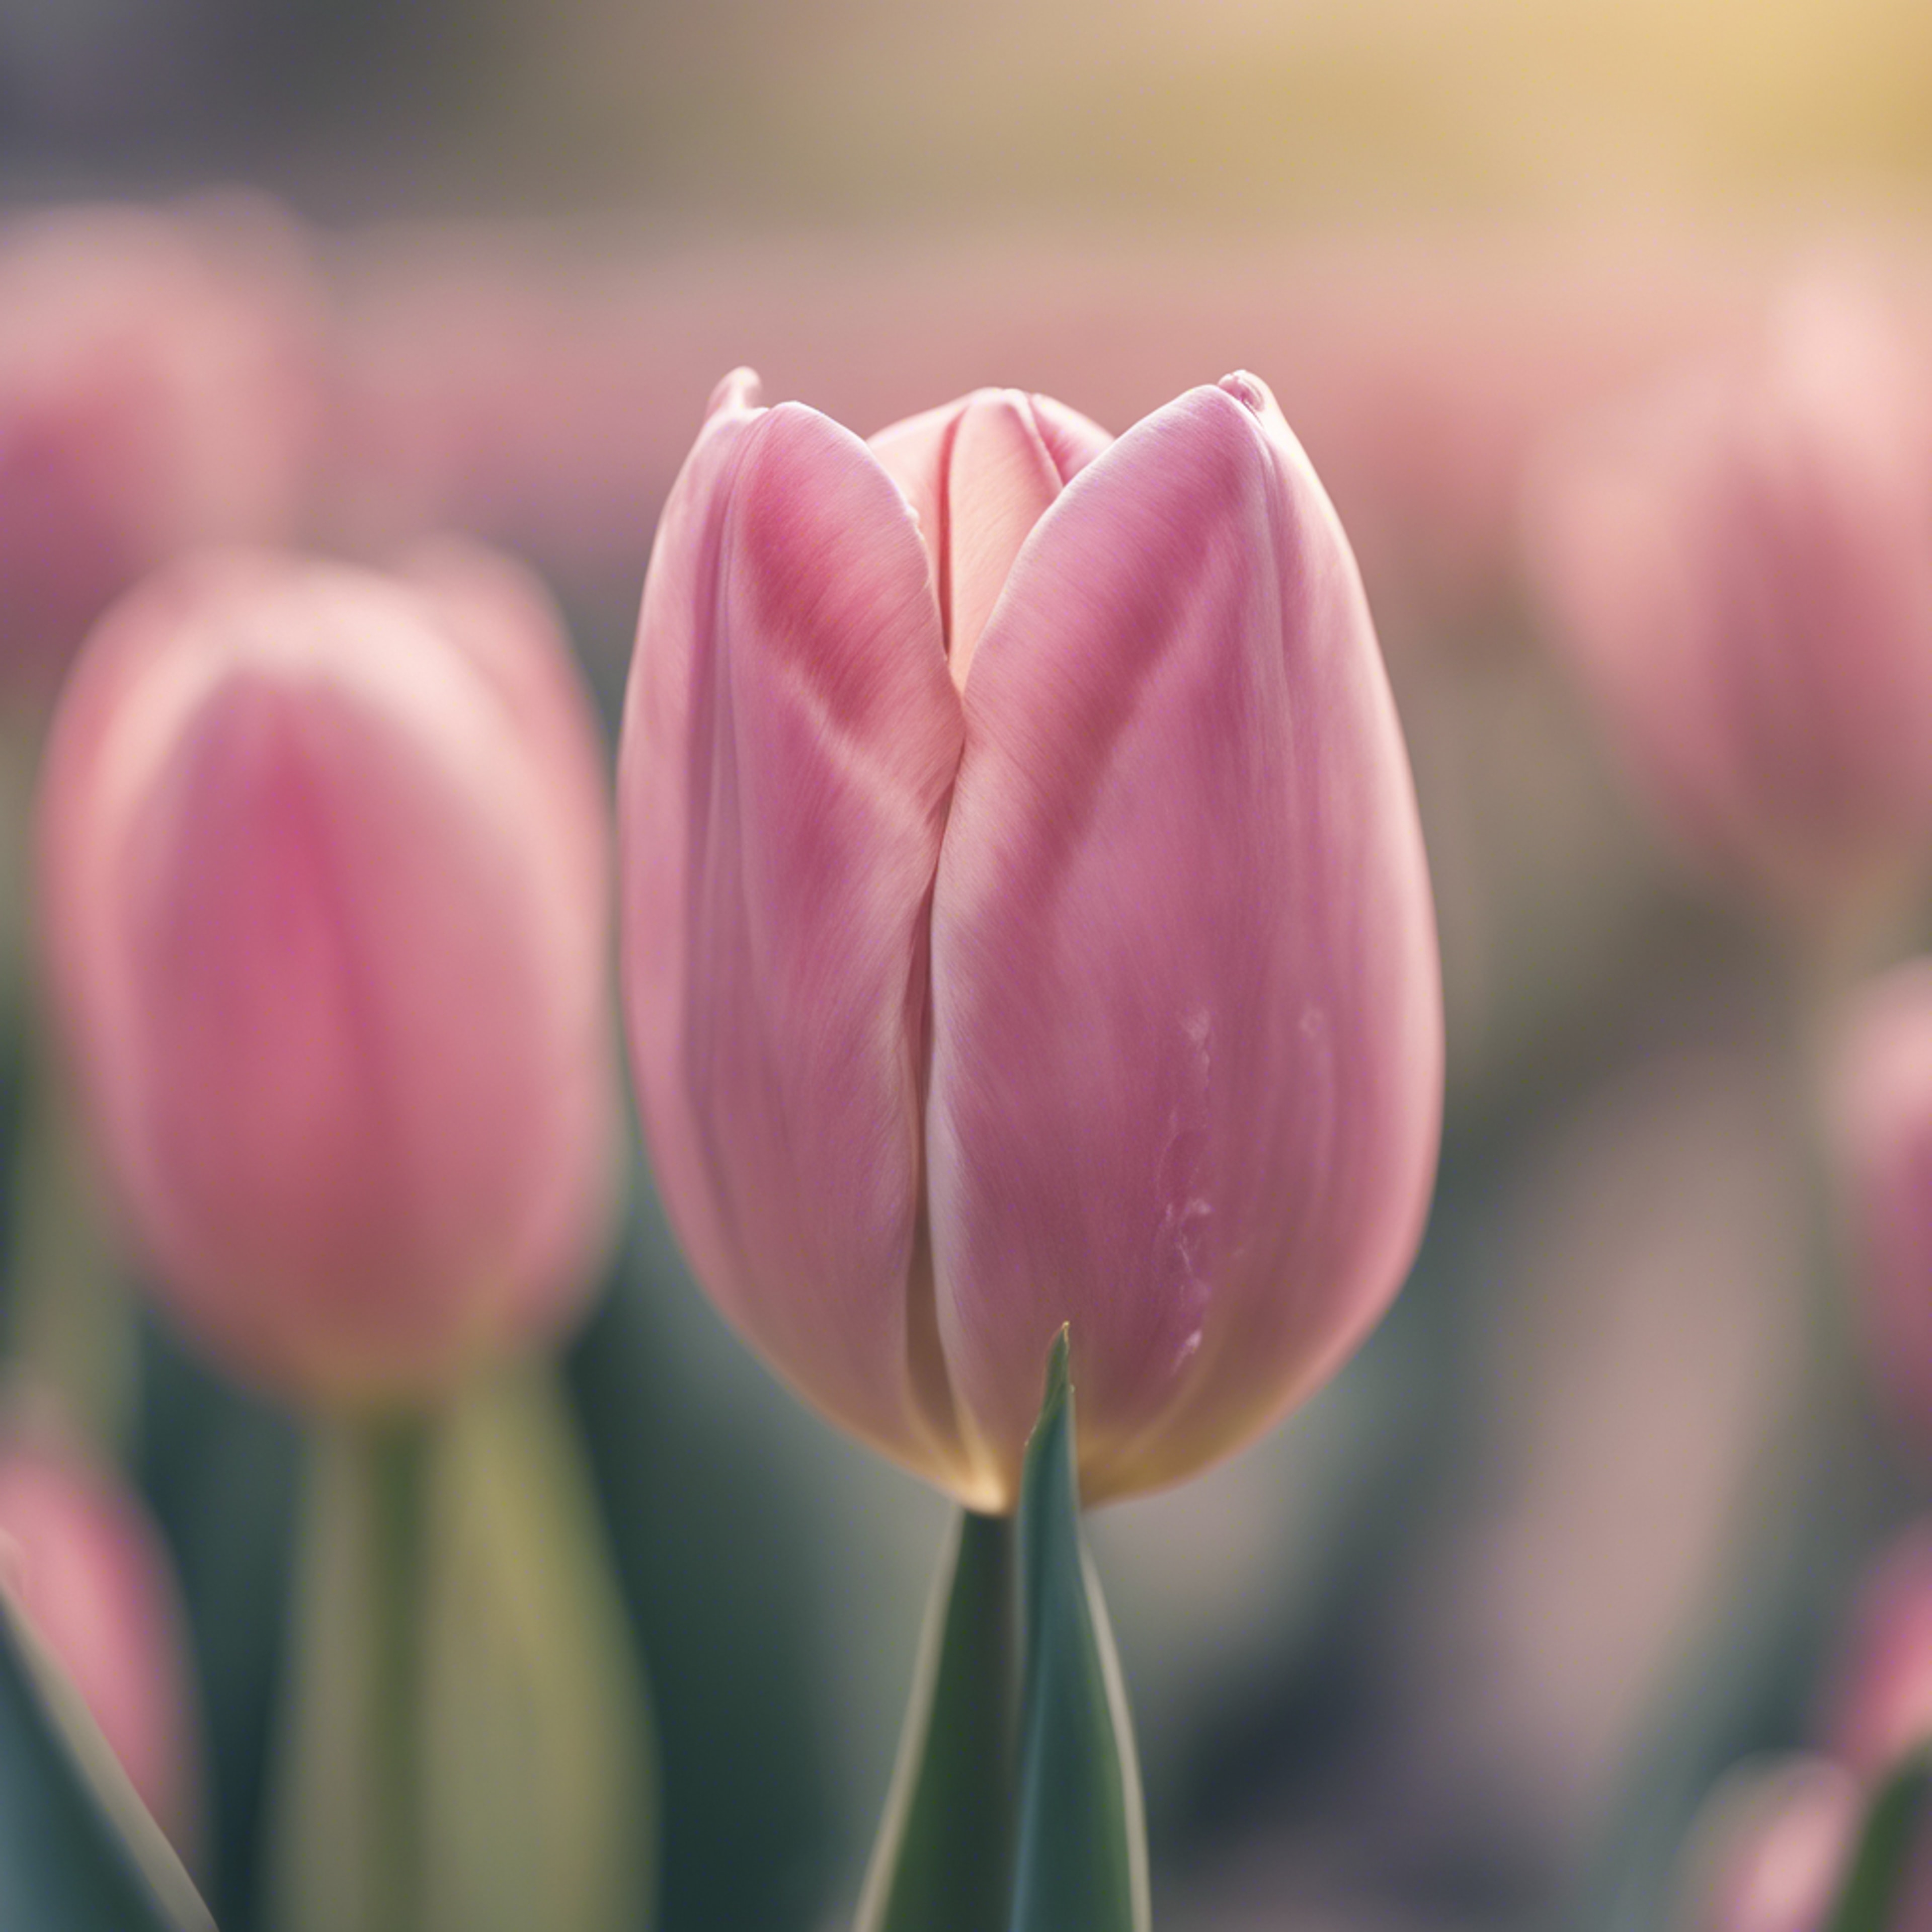 A close-up of a lone pink tulip against a soft and blurry pastel background Kertas dinding[4132f8cb968043e28bd5]